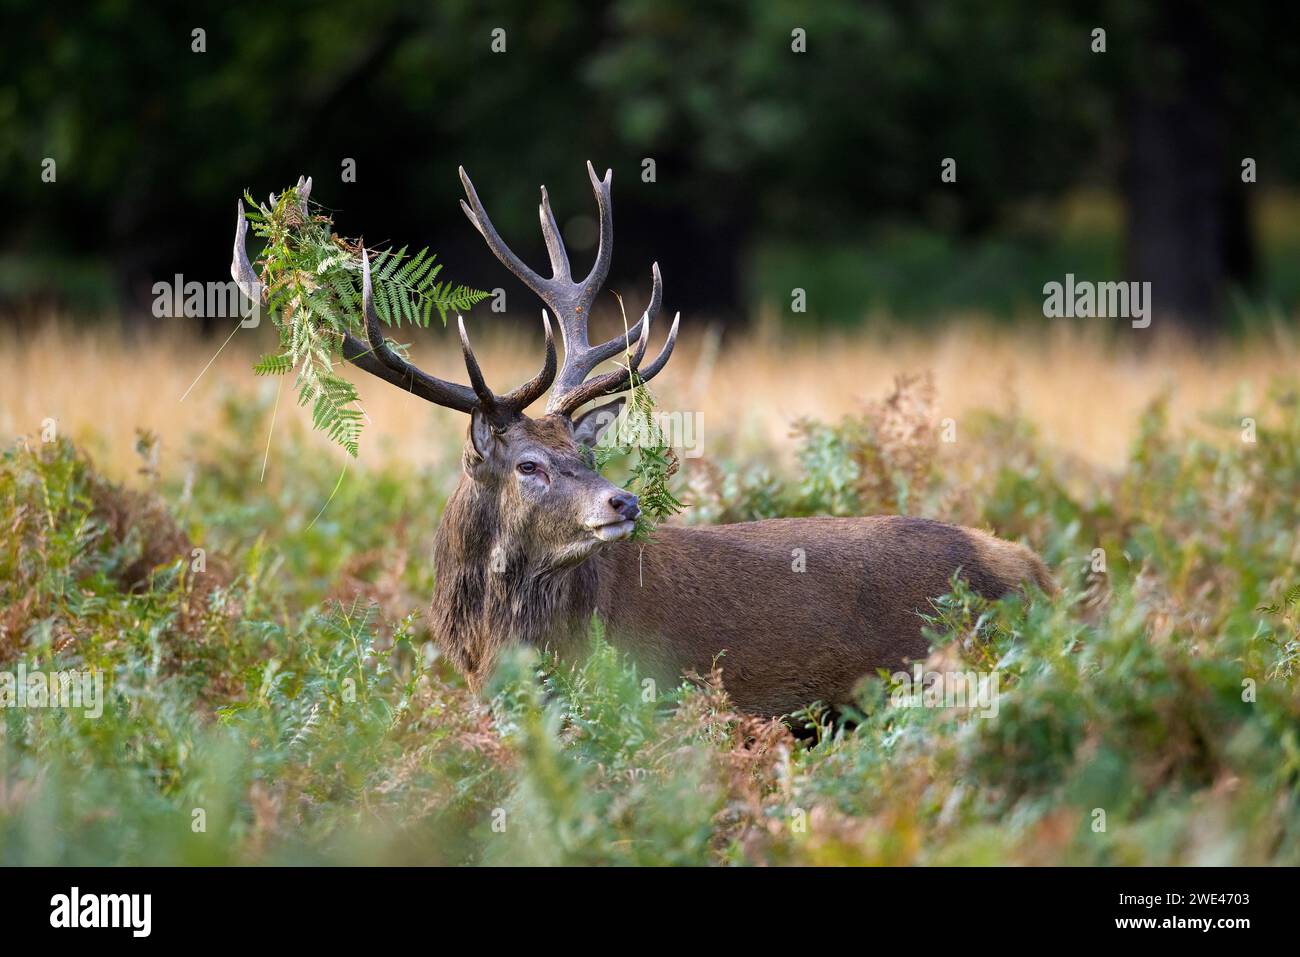 Red deer (Cervus elaphus) stag standing among bracken with antlers covered in ferns and vegetation in forest during the rut in autumn / fall Stock Photo